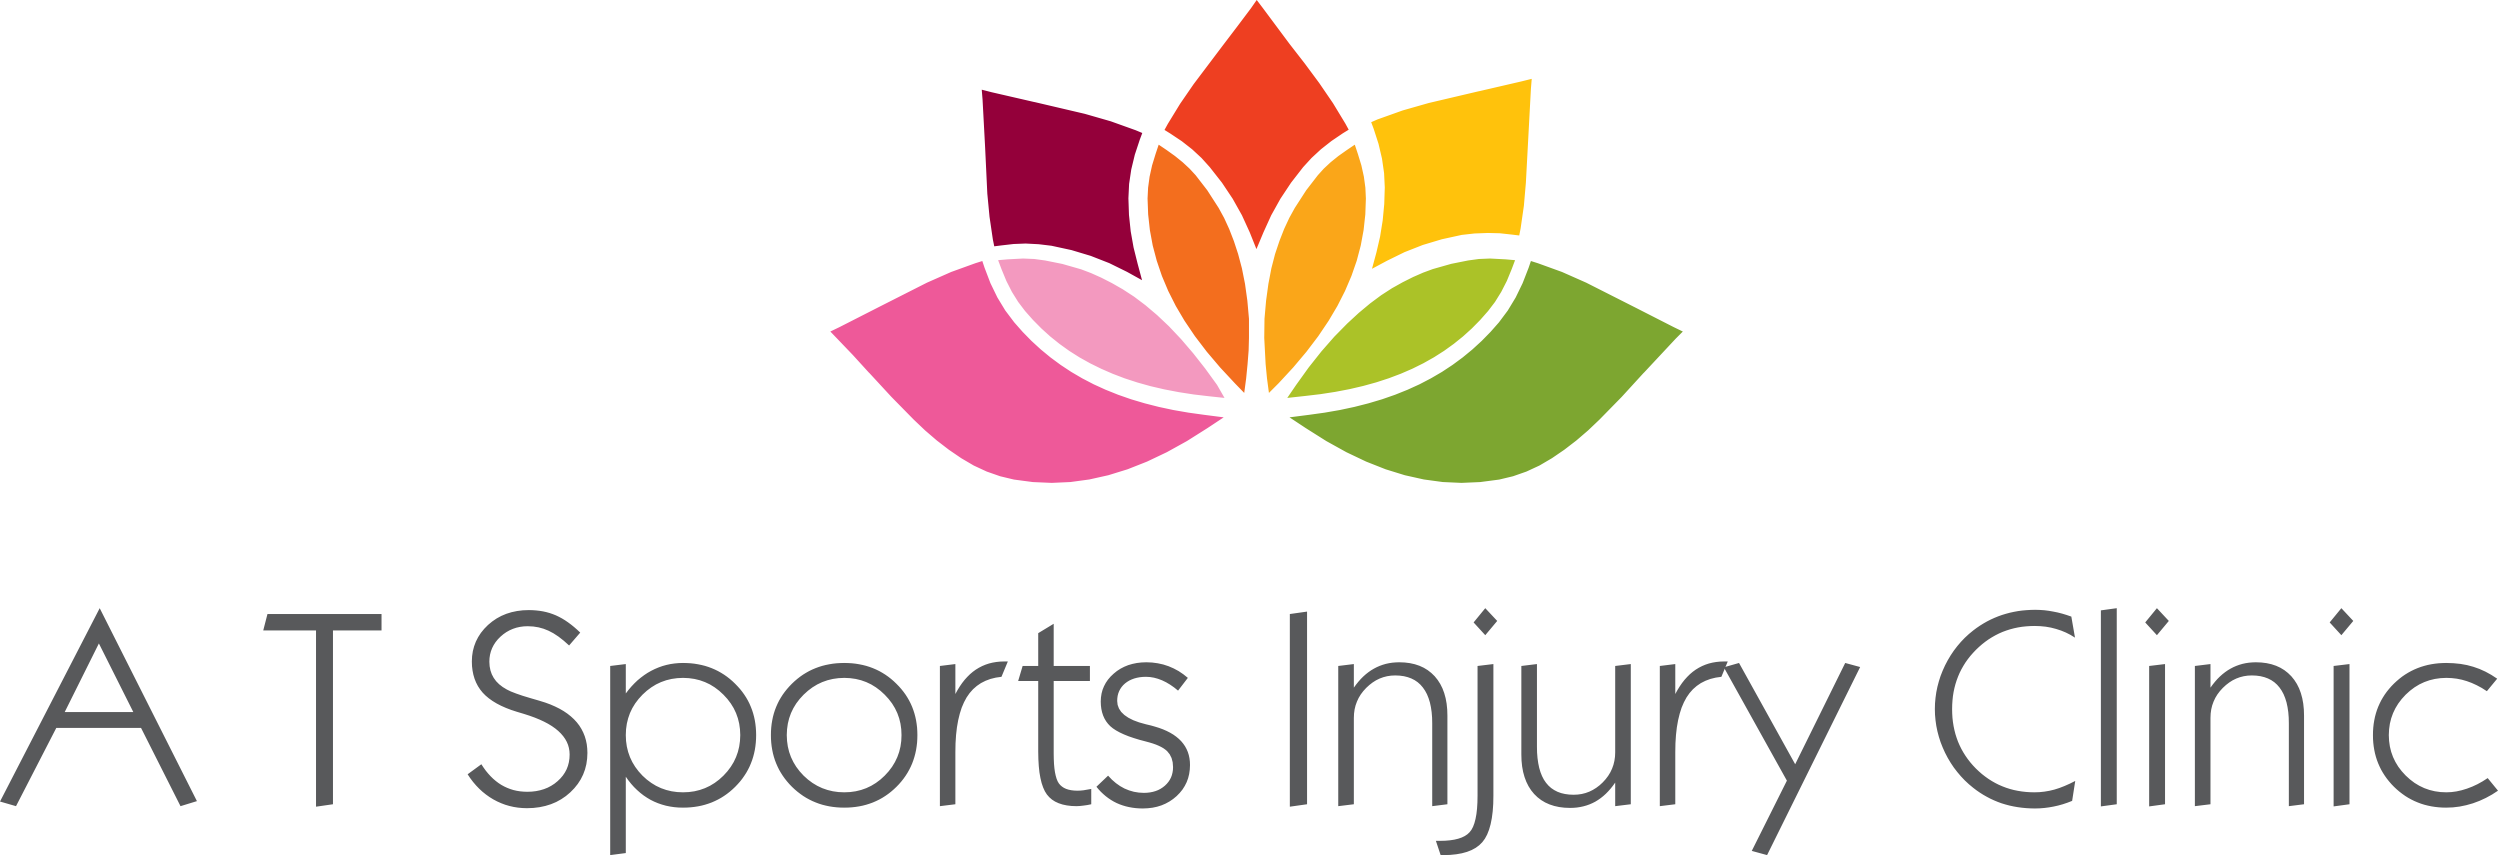 A T sports Injury Clinic - Buy Gift Voucher